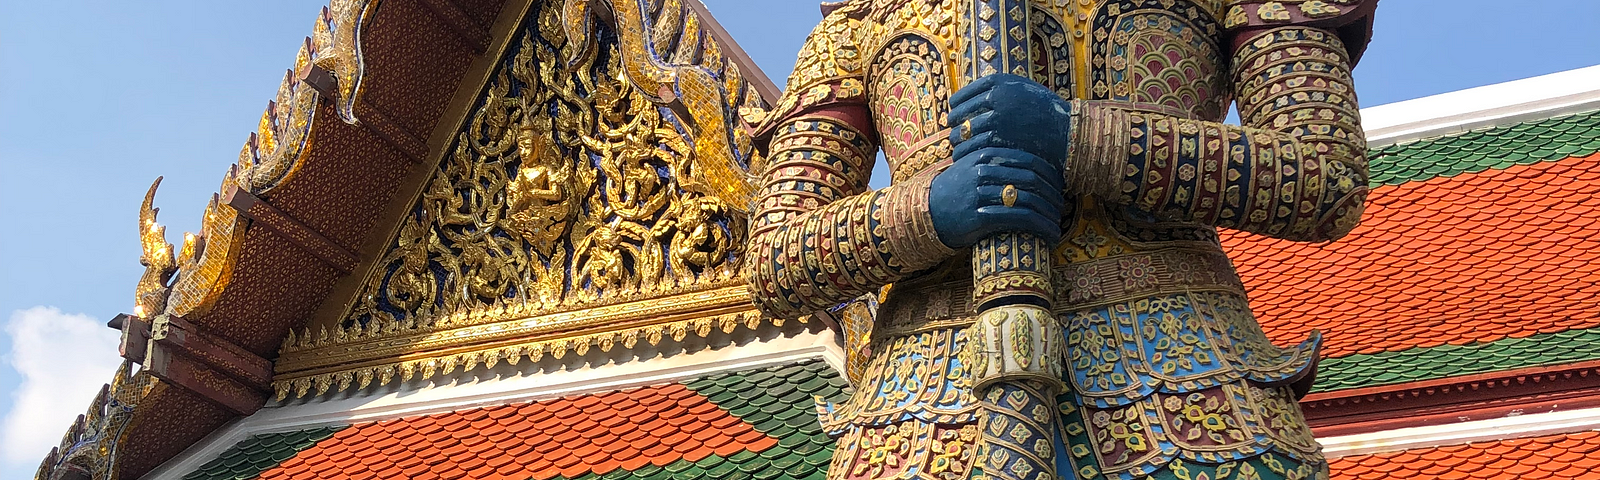 A Demon Guardian at the gallery in the Bangkok Grand Palace